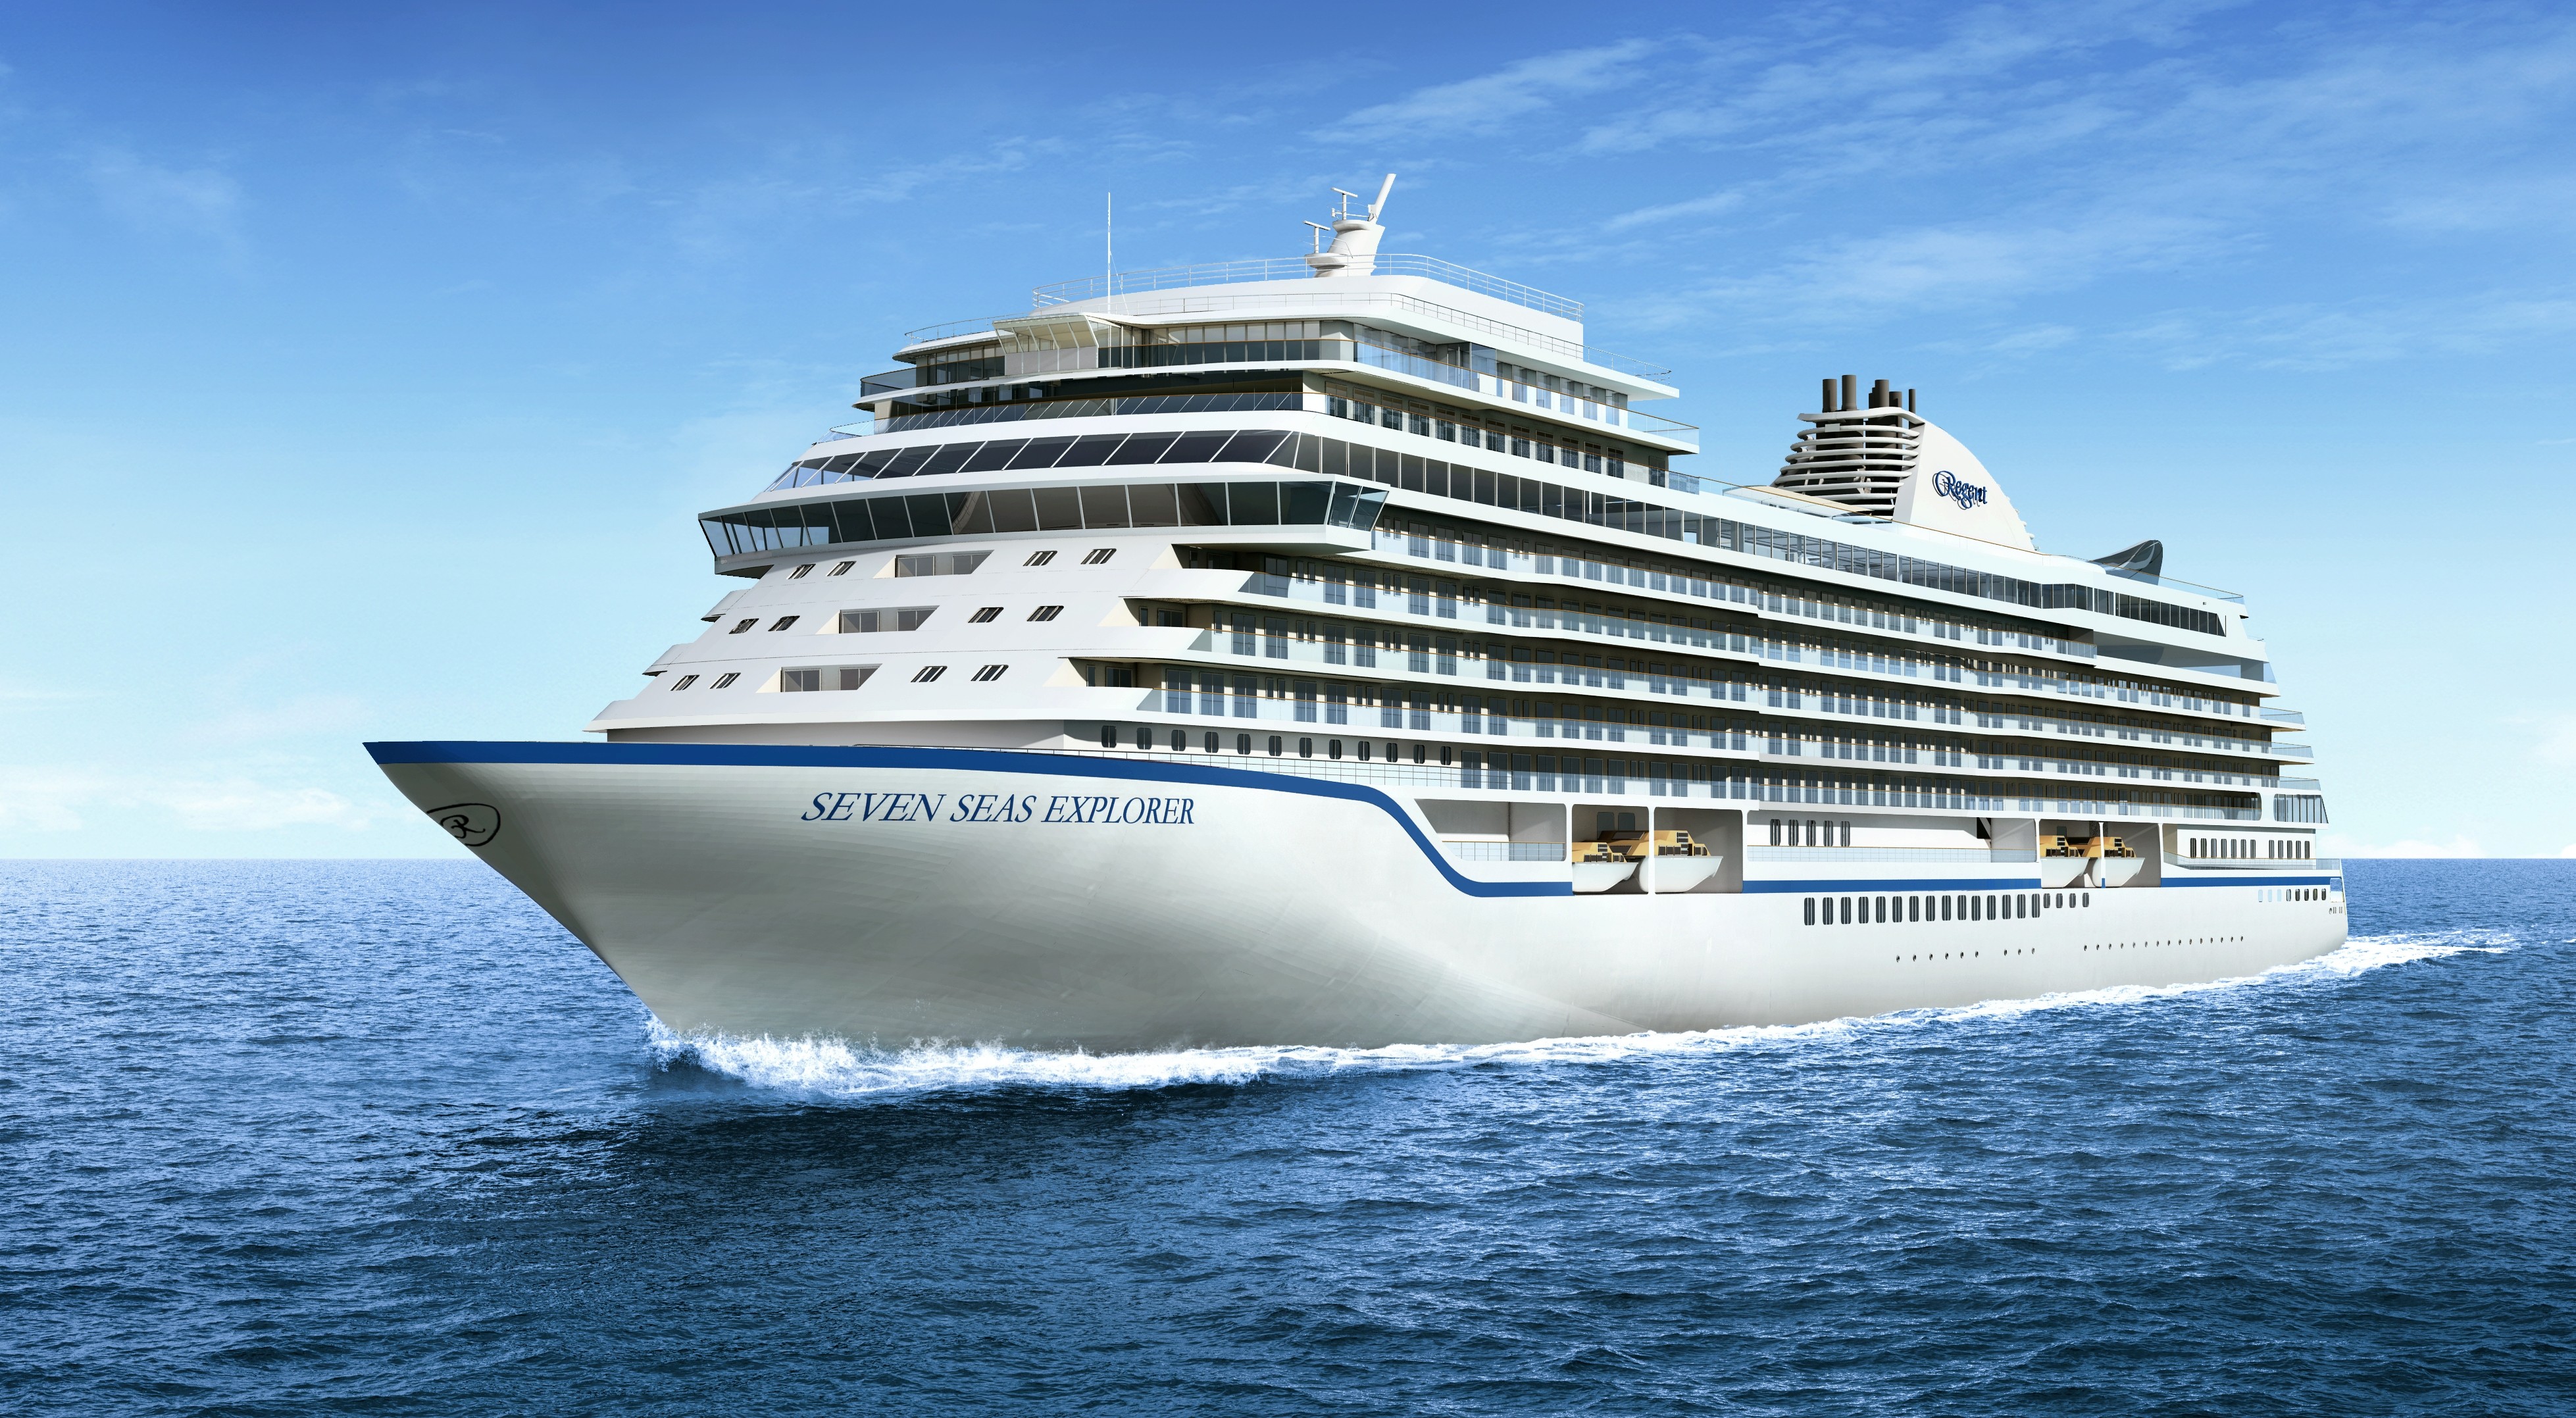 The Regent Explorer features the world’s most luxurious suite at sea for US$10,000 a night per couple. Norwegian Bliss and Marina feature spacious suites, a racetrack and gourmet dining